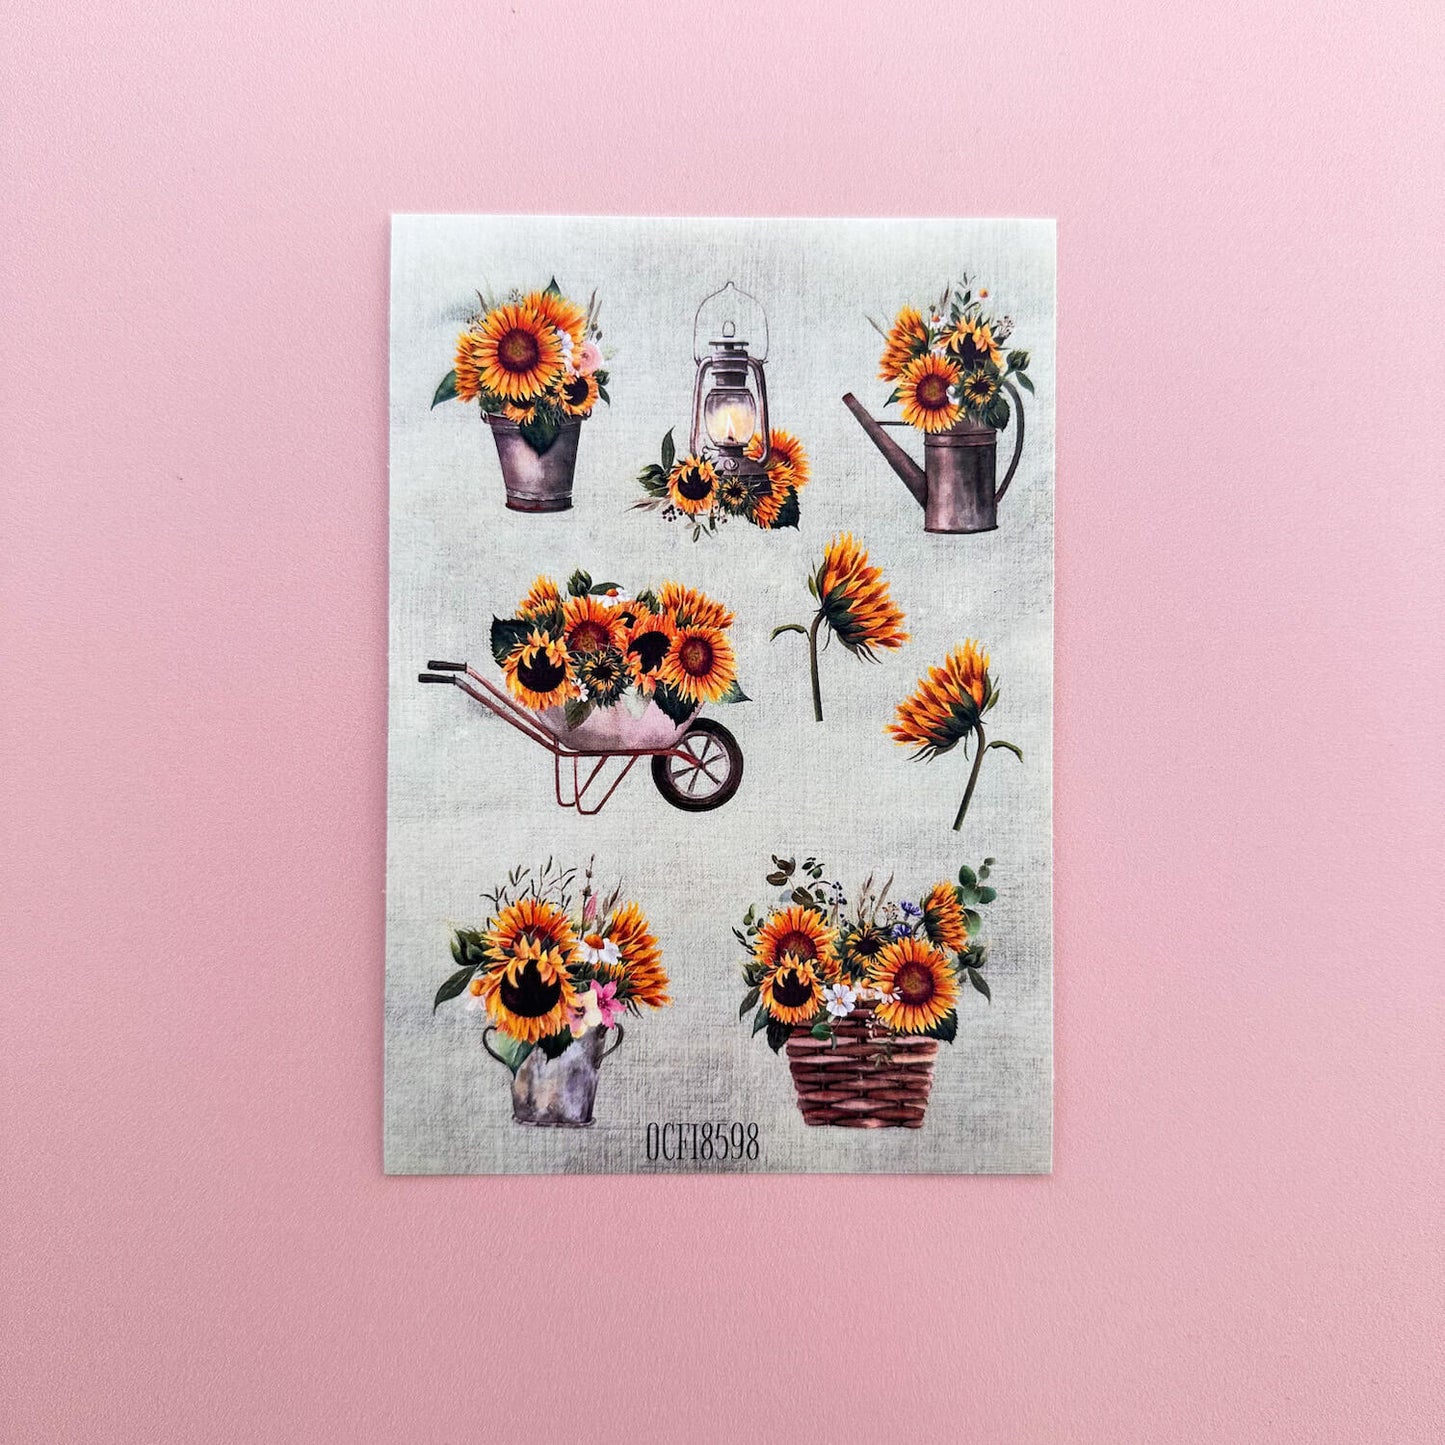 sticker sheet with sunflower and garden illustrations printed on matte paper